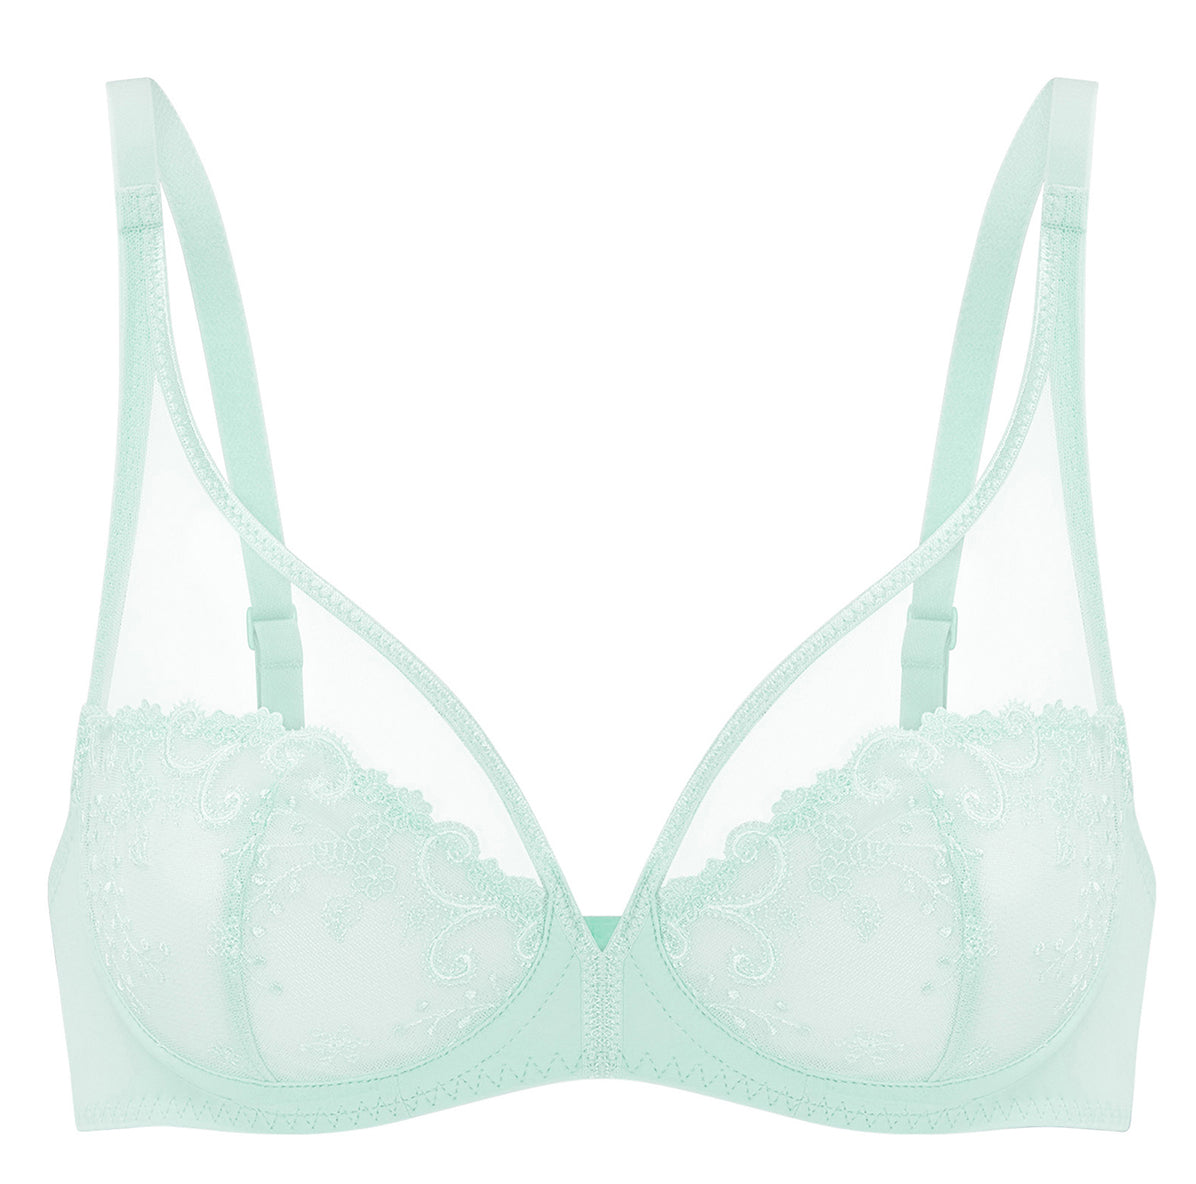 demys_boudoir - Bra size 38/85C available at 300Ksh. #clearancesale  #clearanceoffer